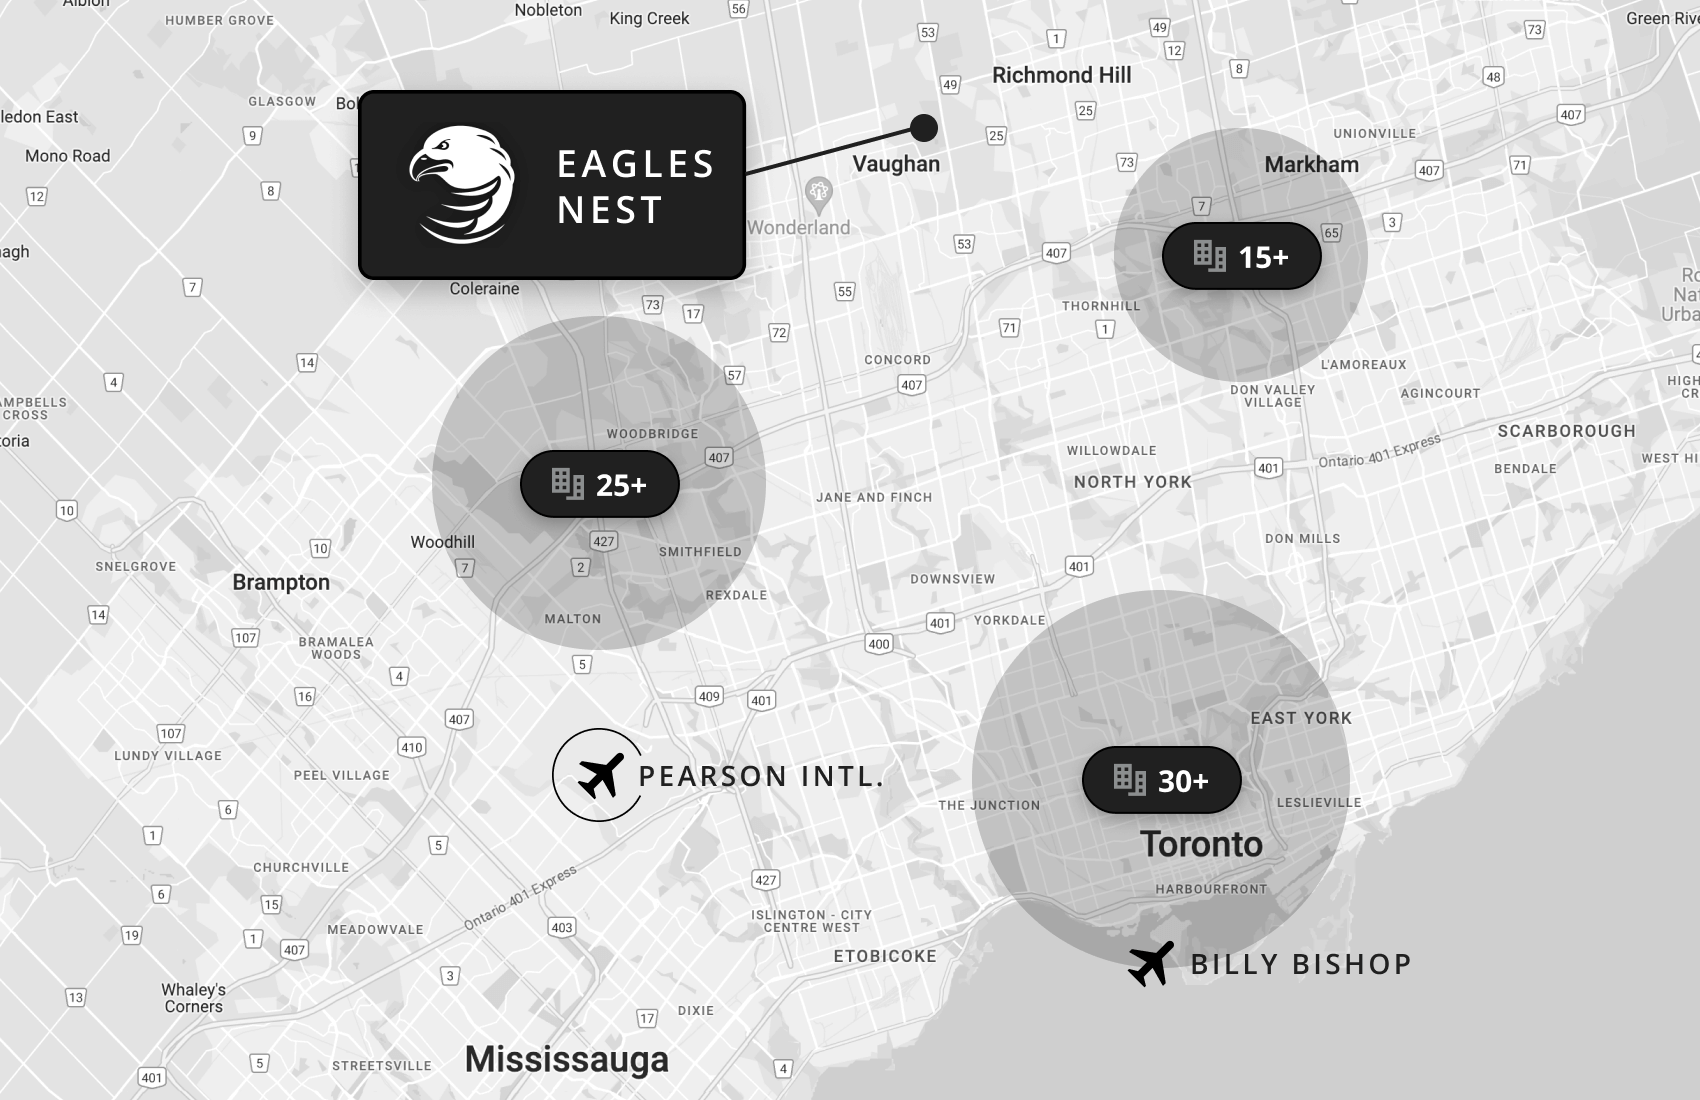 Eagles Nest location relative to hotels, airports and major roads